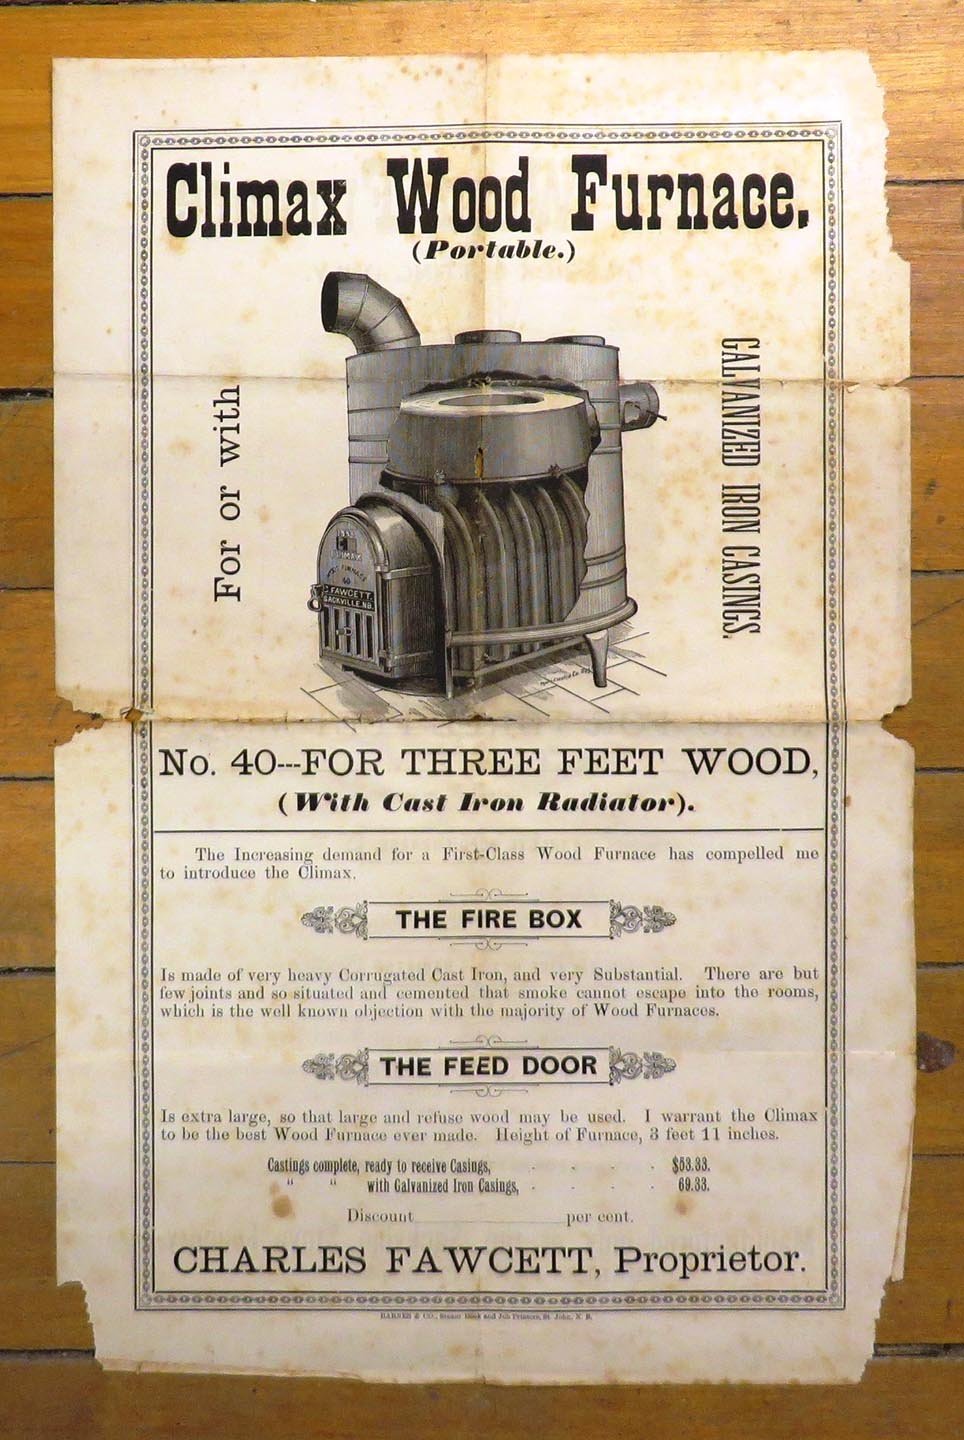 Advertisement for Climax Wood Furnace